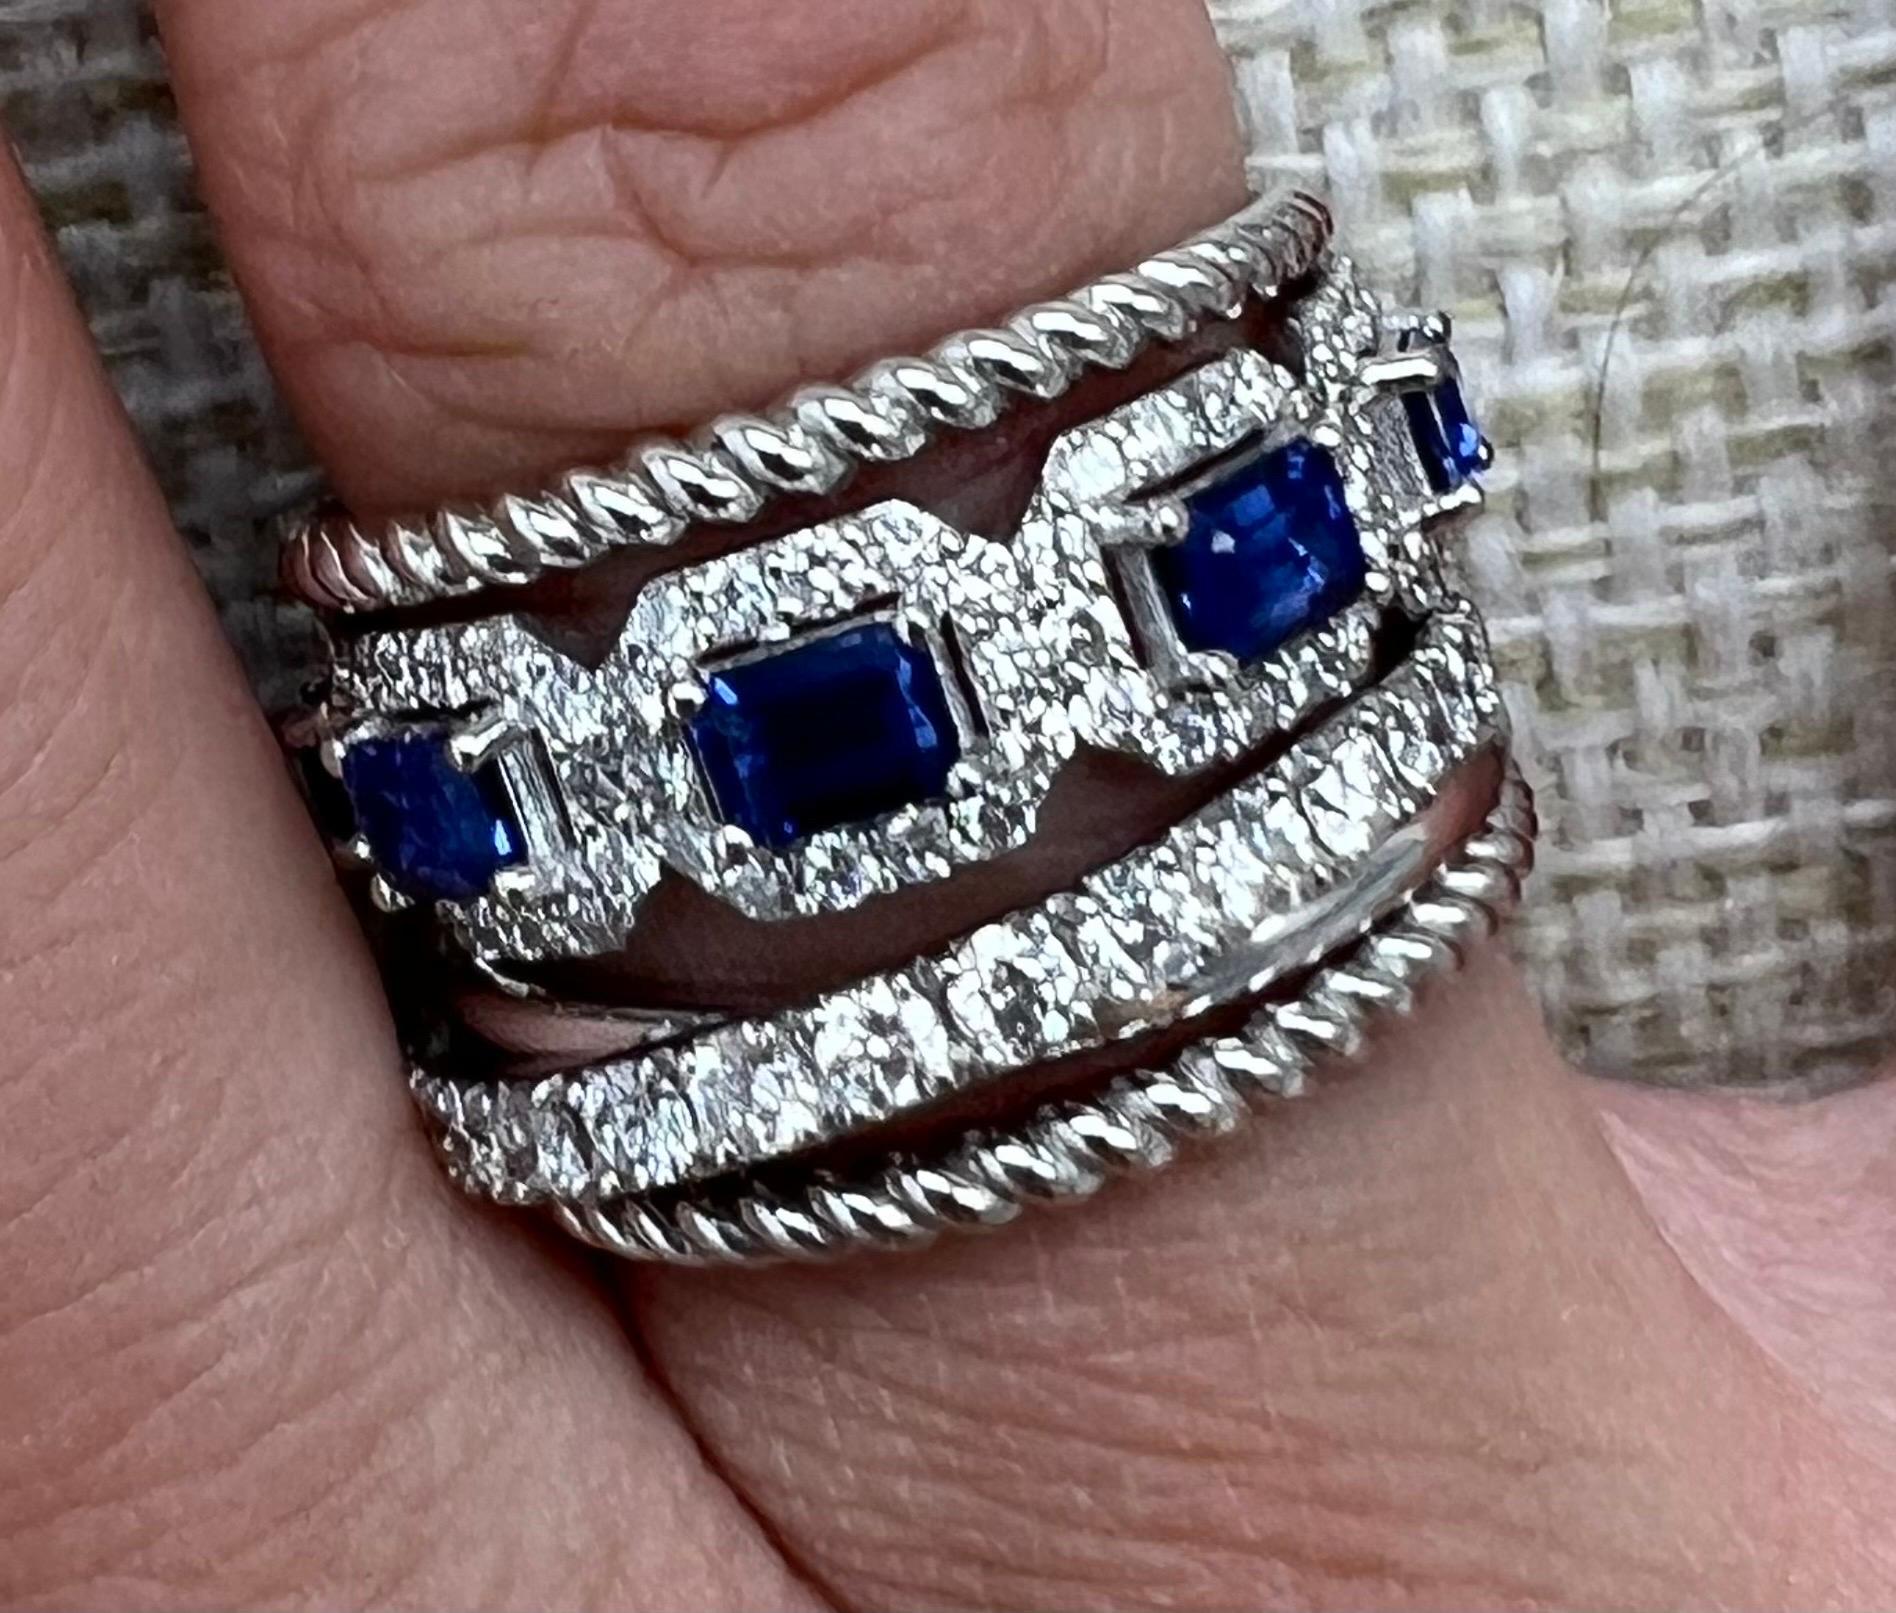 14k W Gold Diamond Ring with 7 Emerald Cut Blue Sapphires, 1.42CT D, 2.09CT SAP In New Condition For Sale In Great Neck, NY